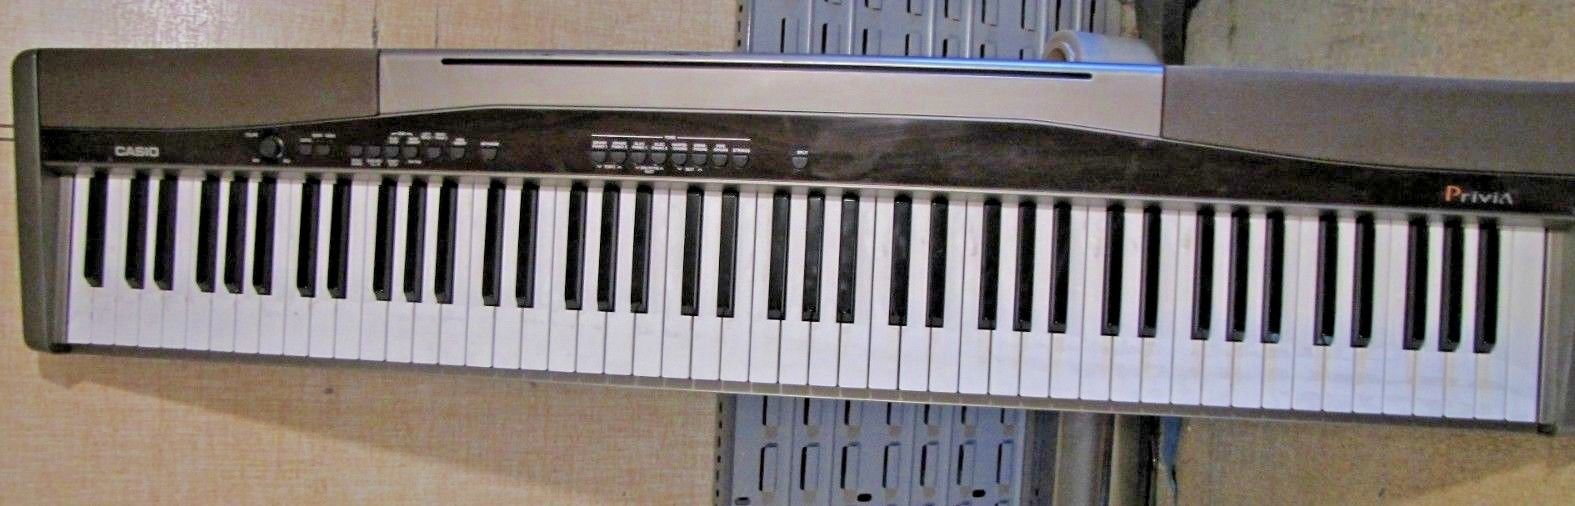 CASIO PRIVIA PX-100 88-Key Weighte Keyboard MIDI Compact Digital Piano FOR PARTS